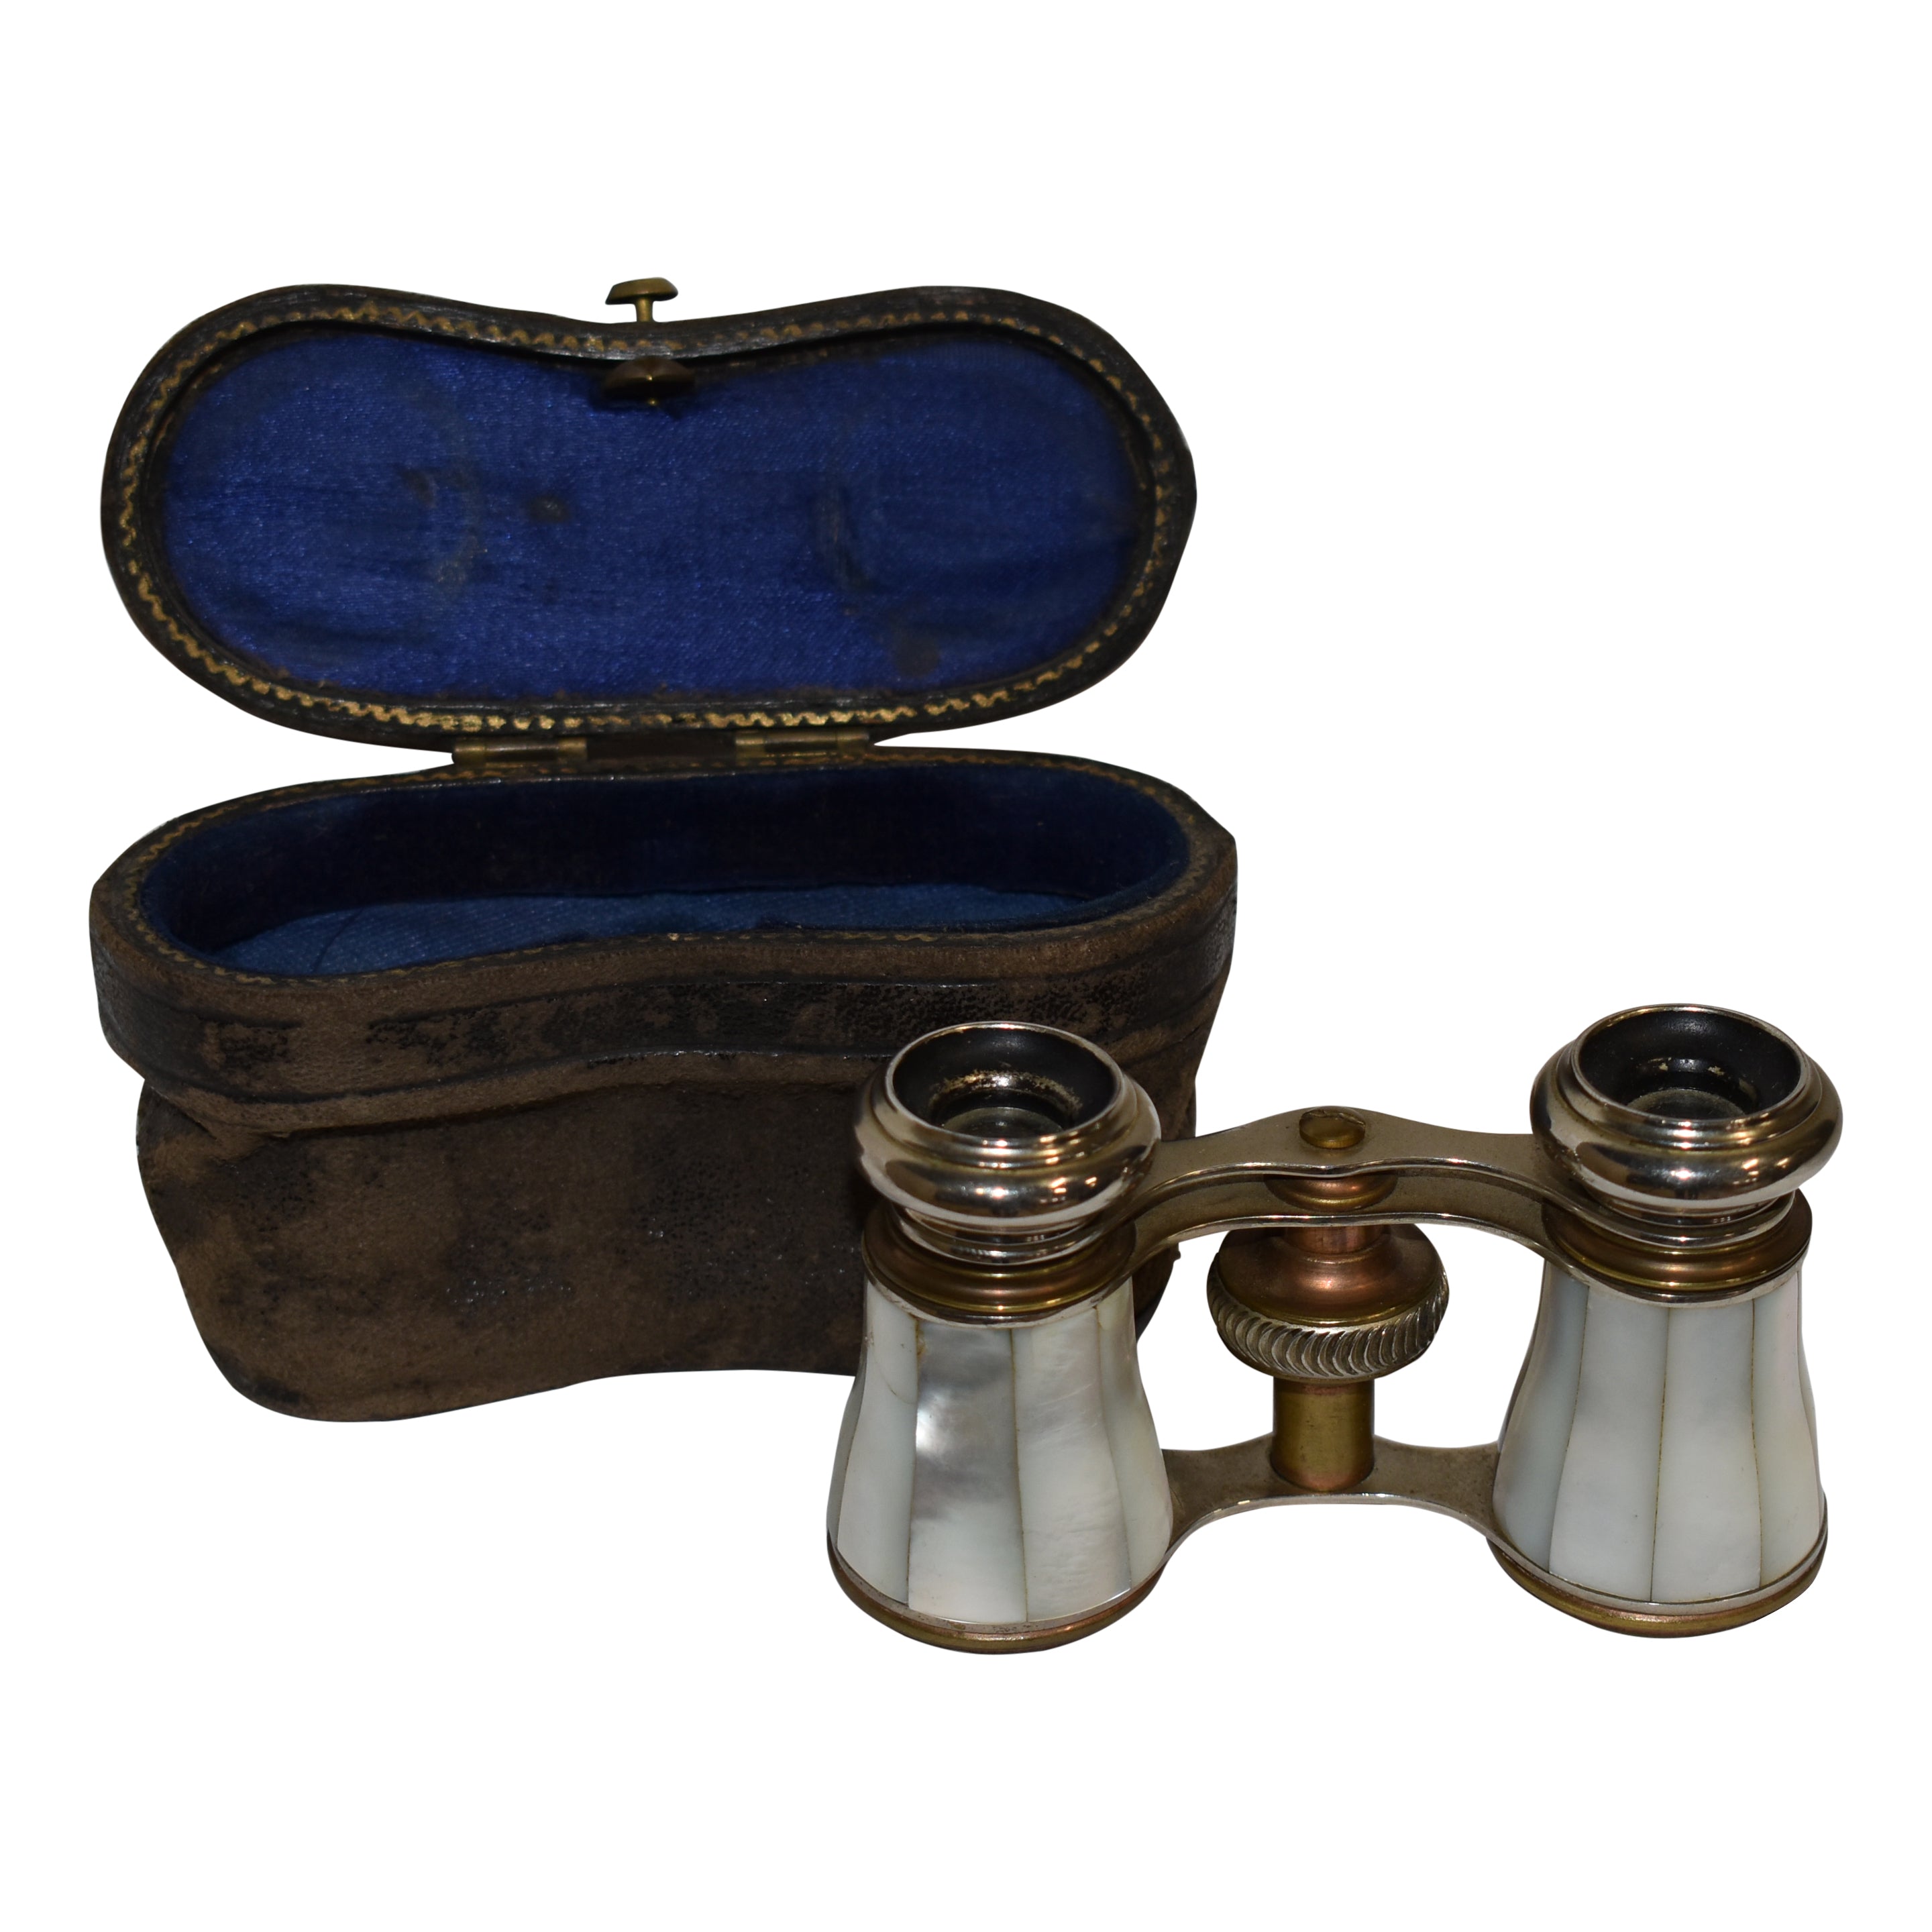 Mother of Pearl Opera Glasses with Leather Case